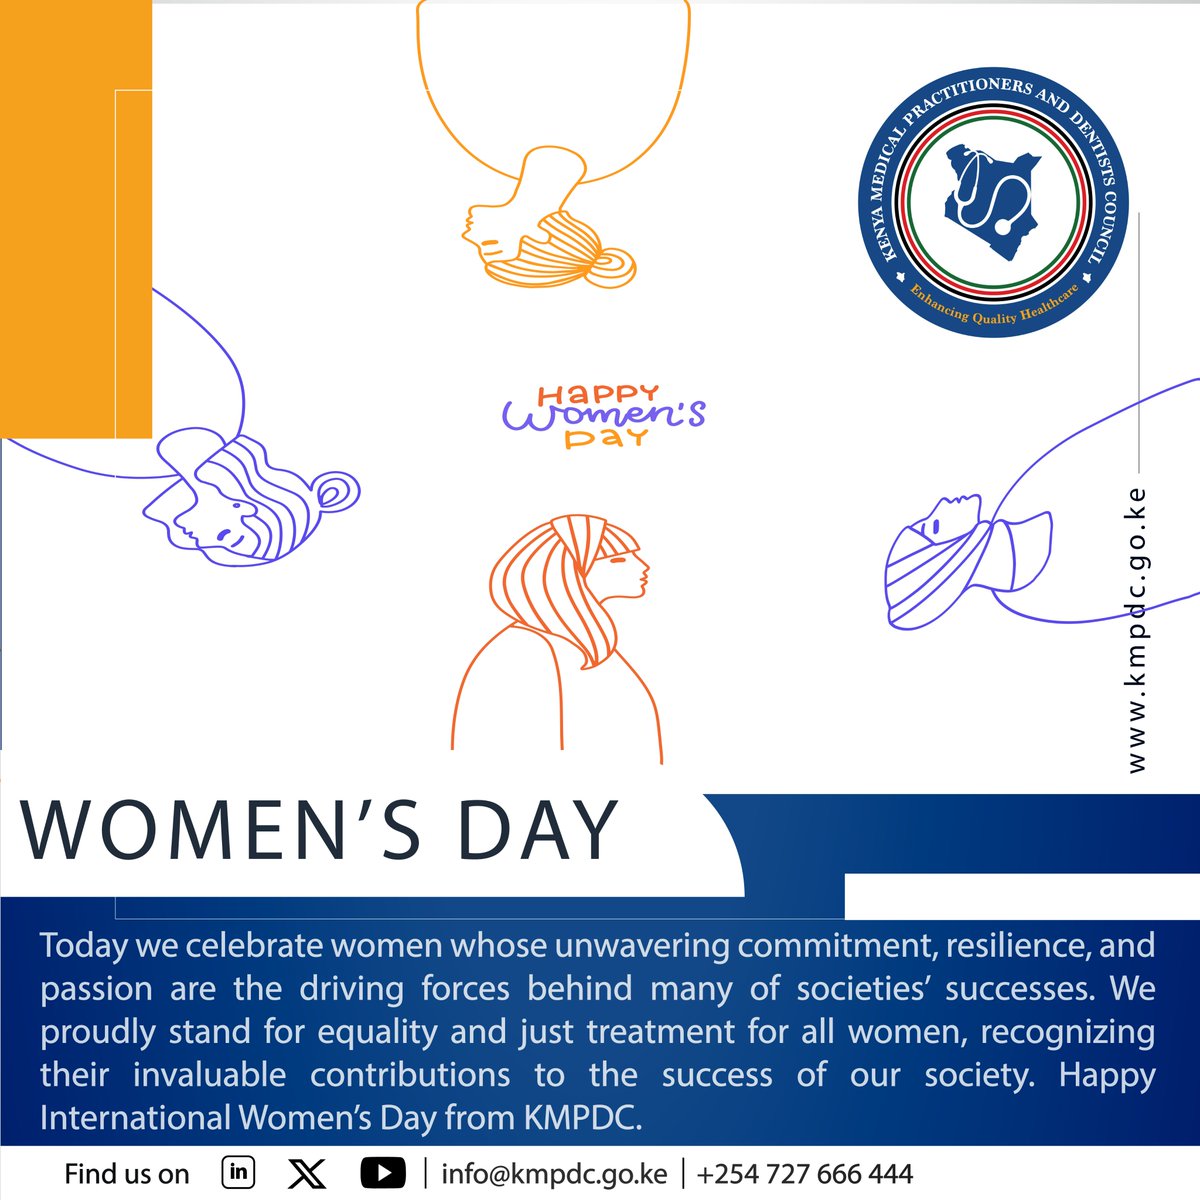 Today we celebrate women whose unwavering commitment, resilience, and passion are the driving forces behind many of societies’ successes. We proudly stand for equality and just treatment for all women, recognizing their invaluable contributions to the success of our society.